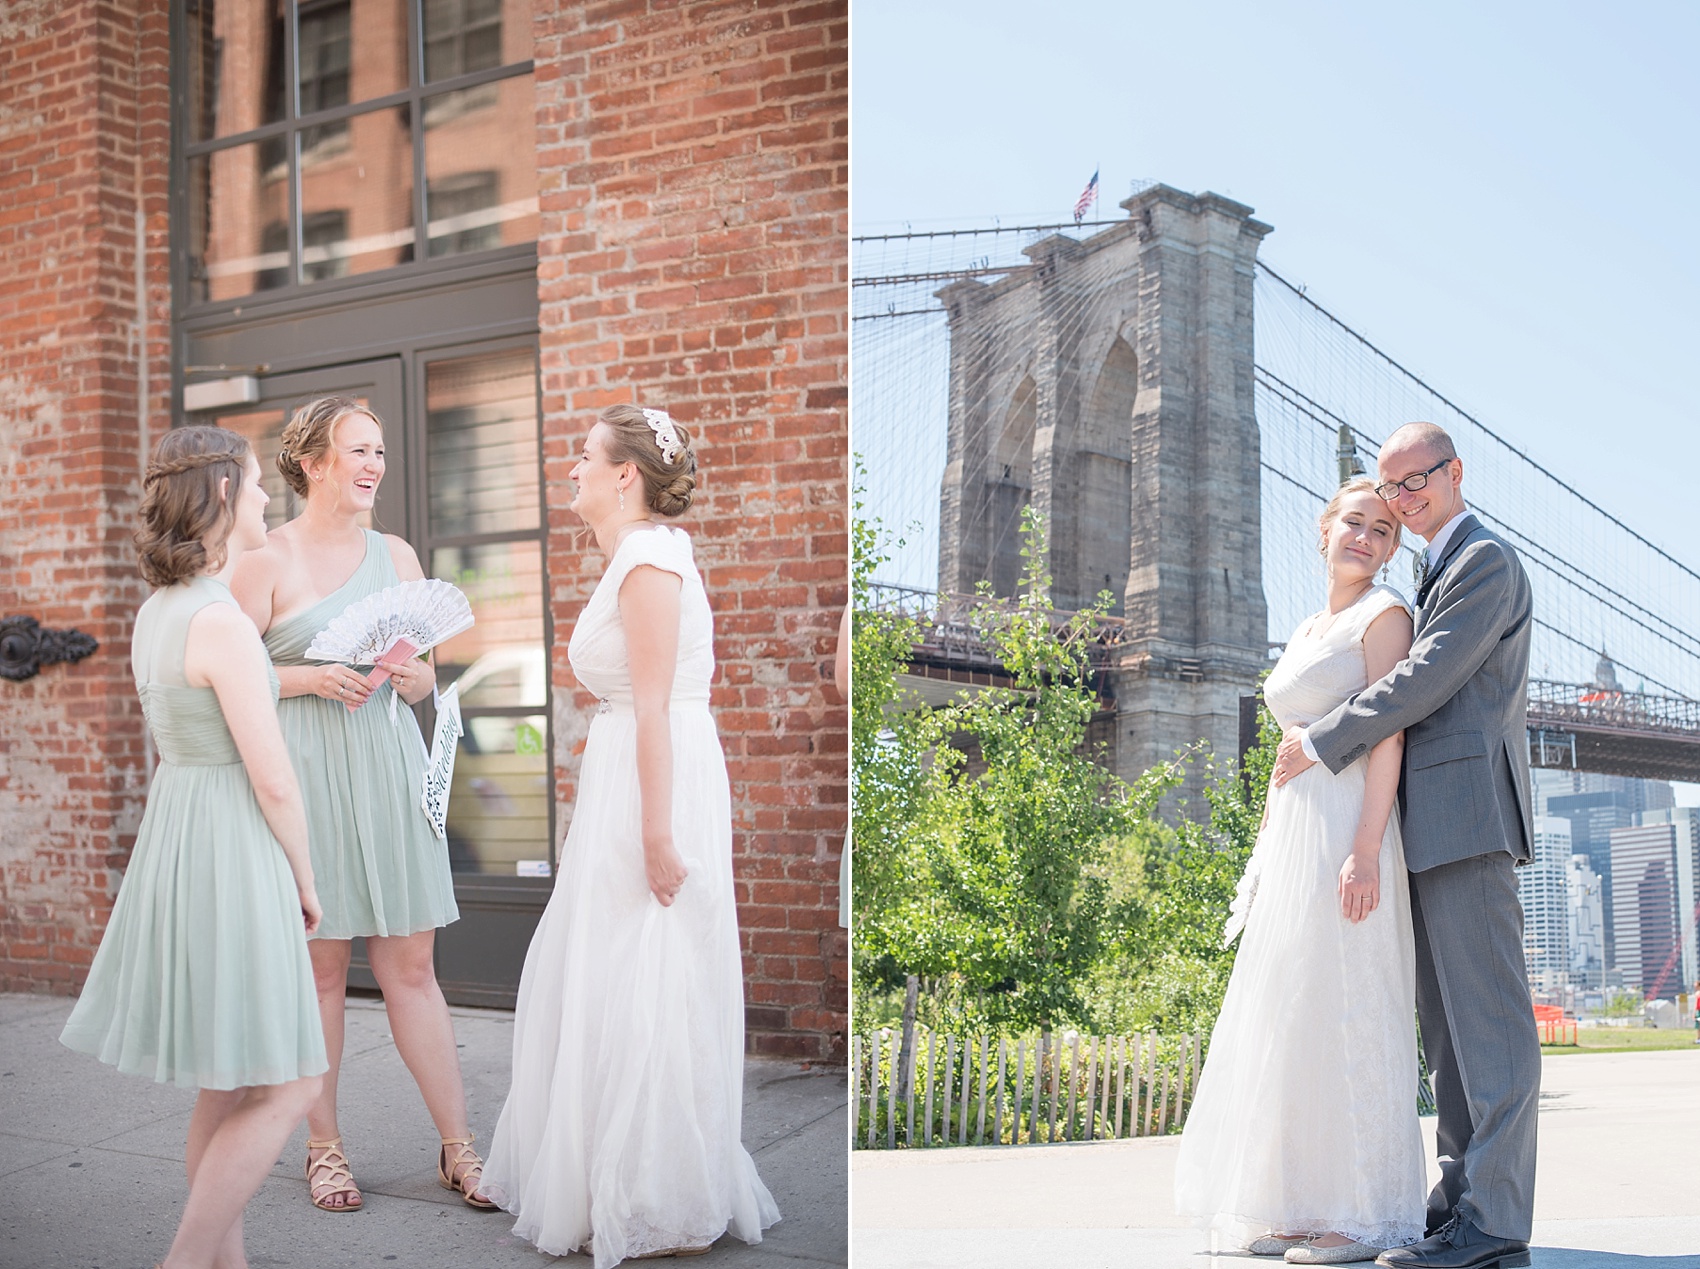 Wedding party photo in DUMBO, with Brooklyn Bridge. Photos by Mikkel Paige Photography, NYC wedding photographer.